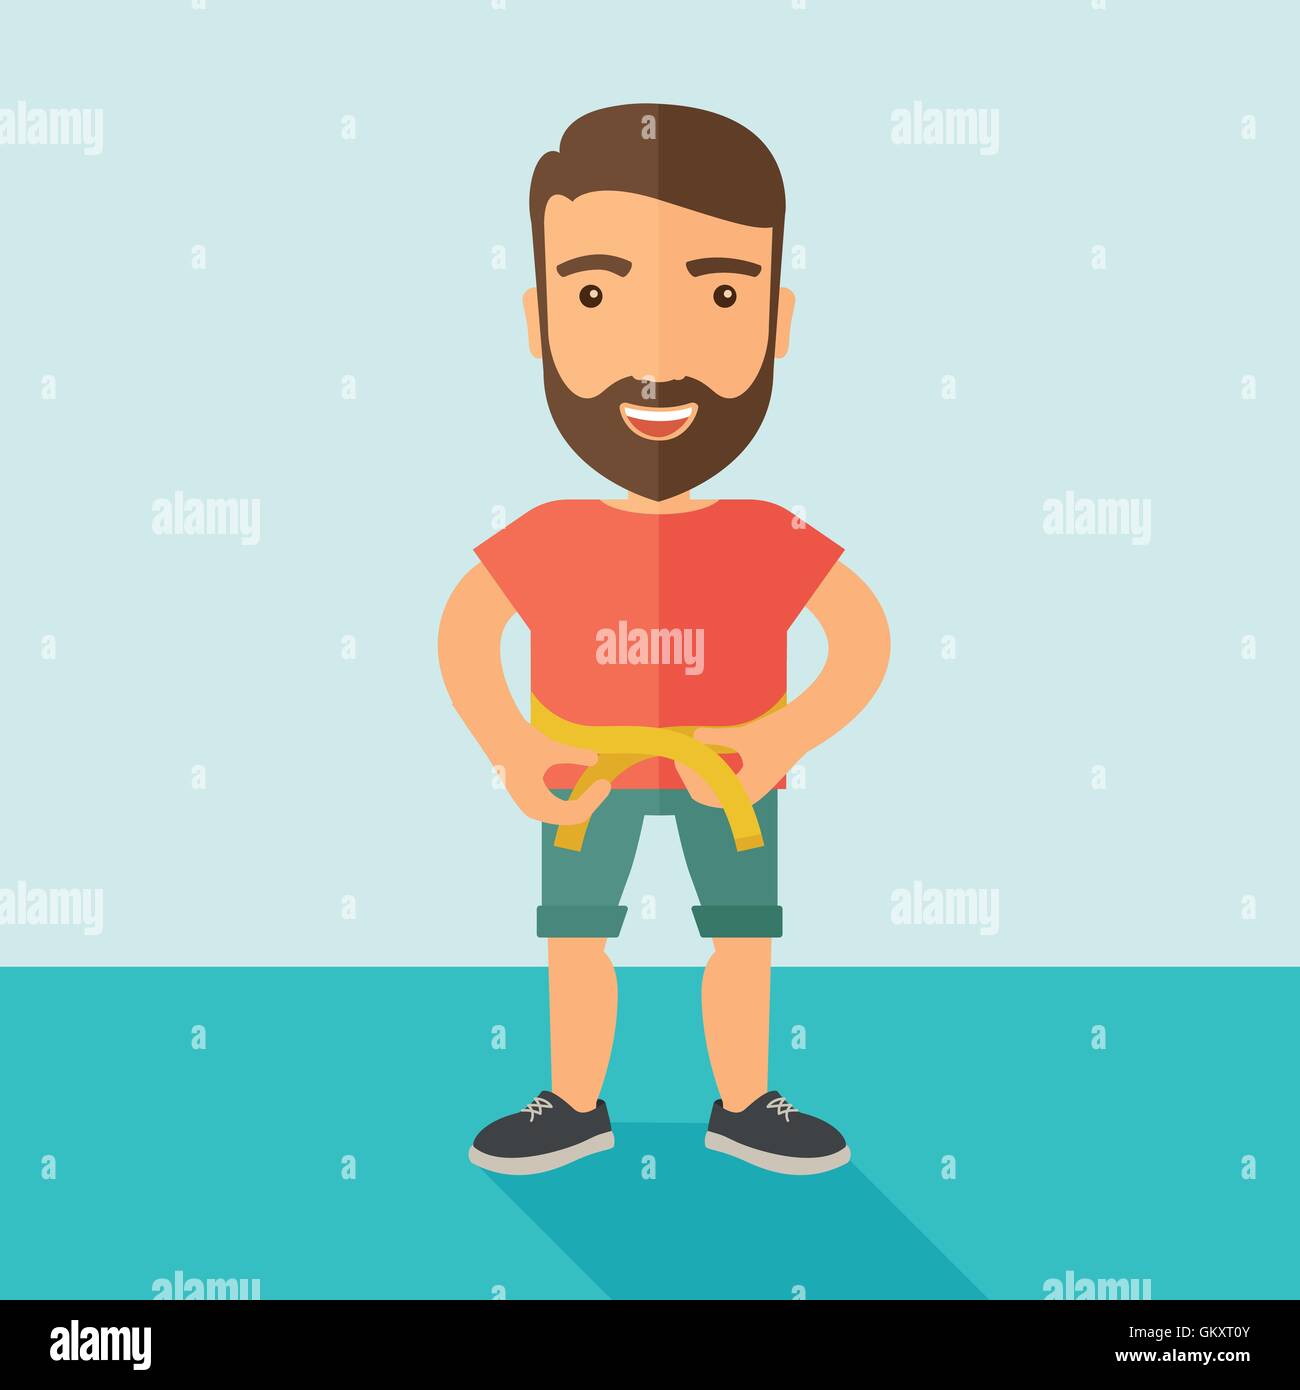 Man is practicing karate exercise. Stock Vector